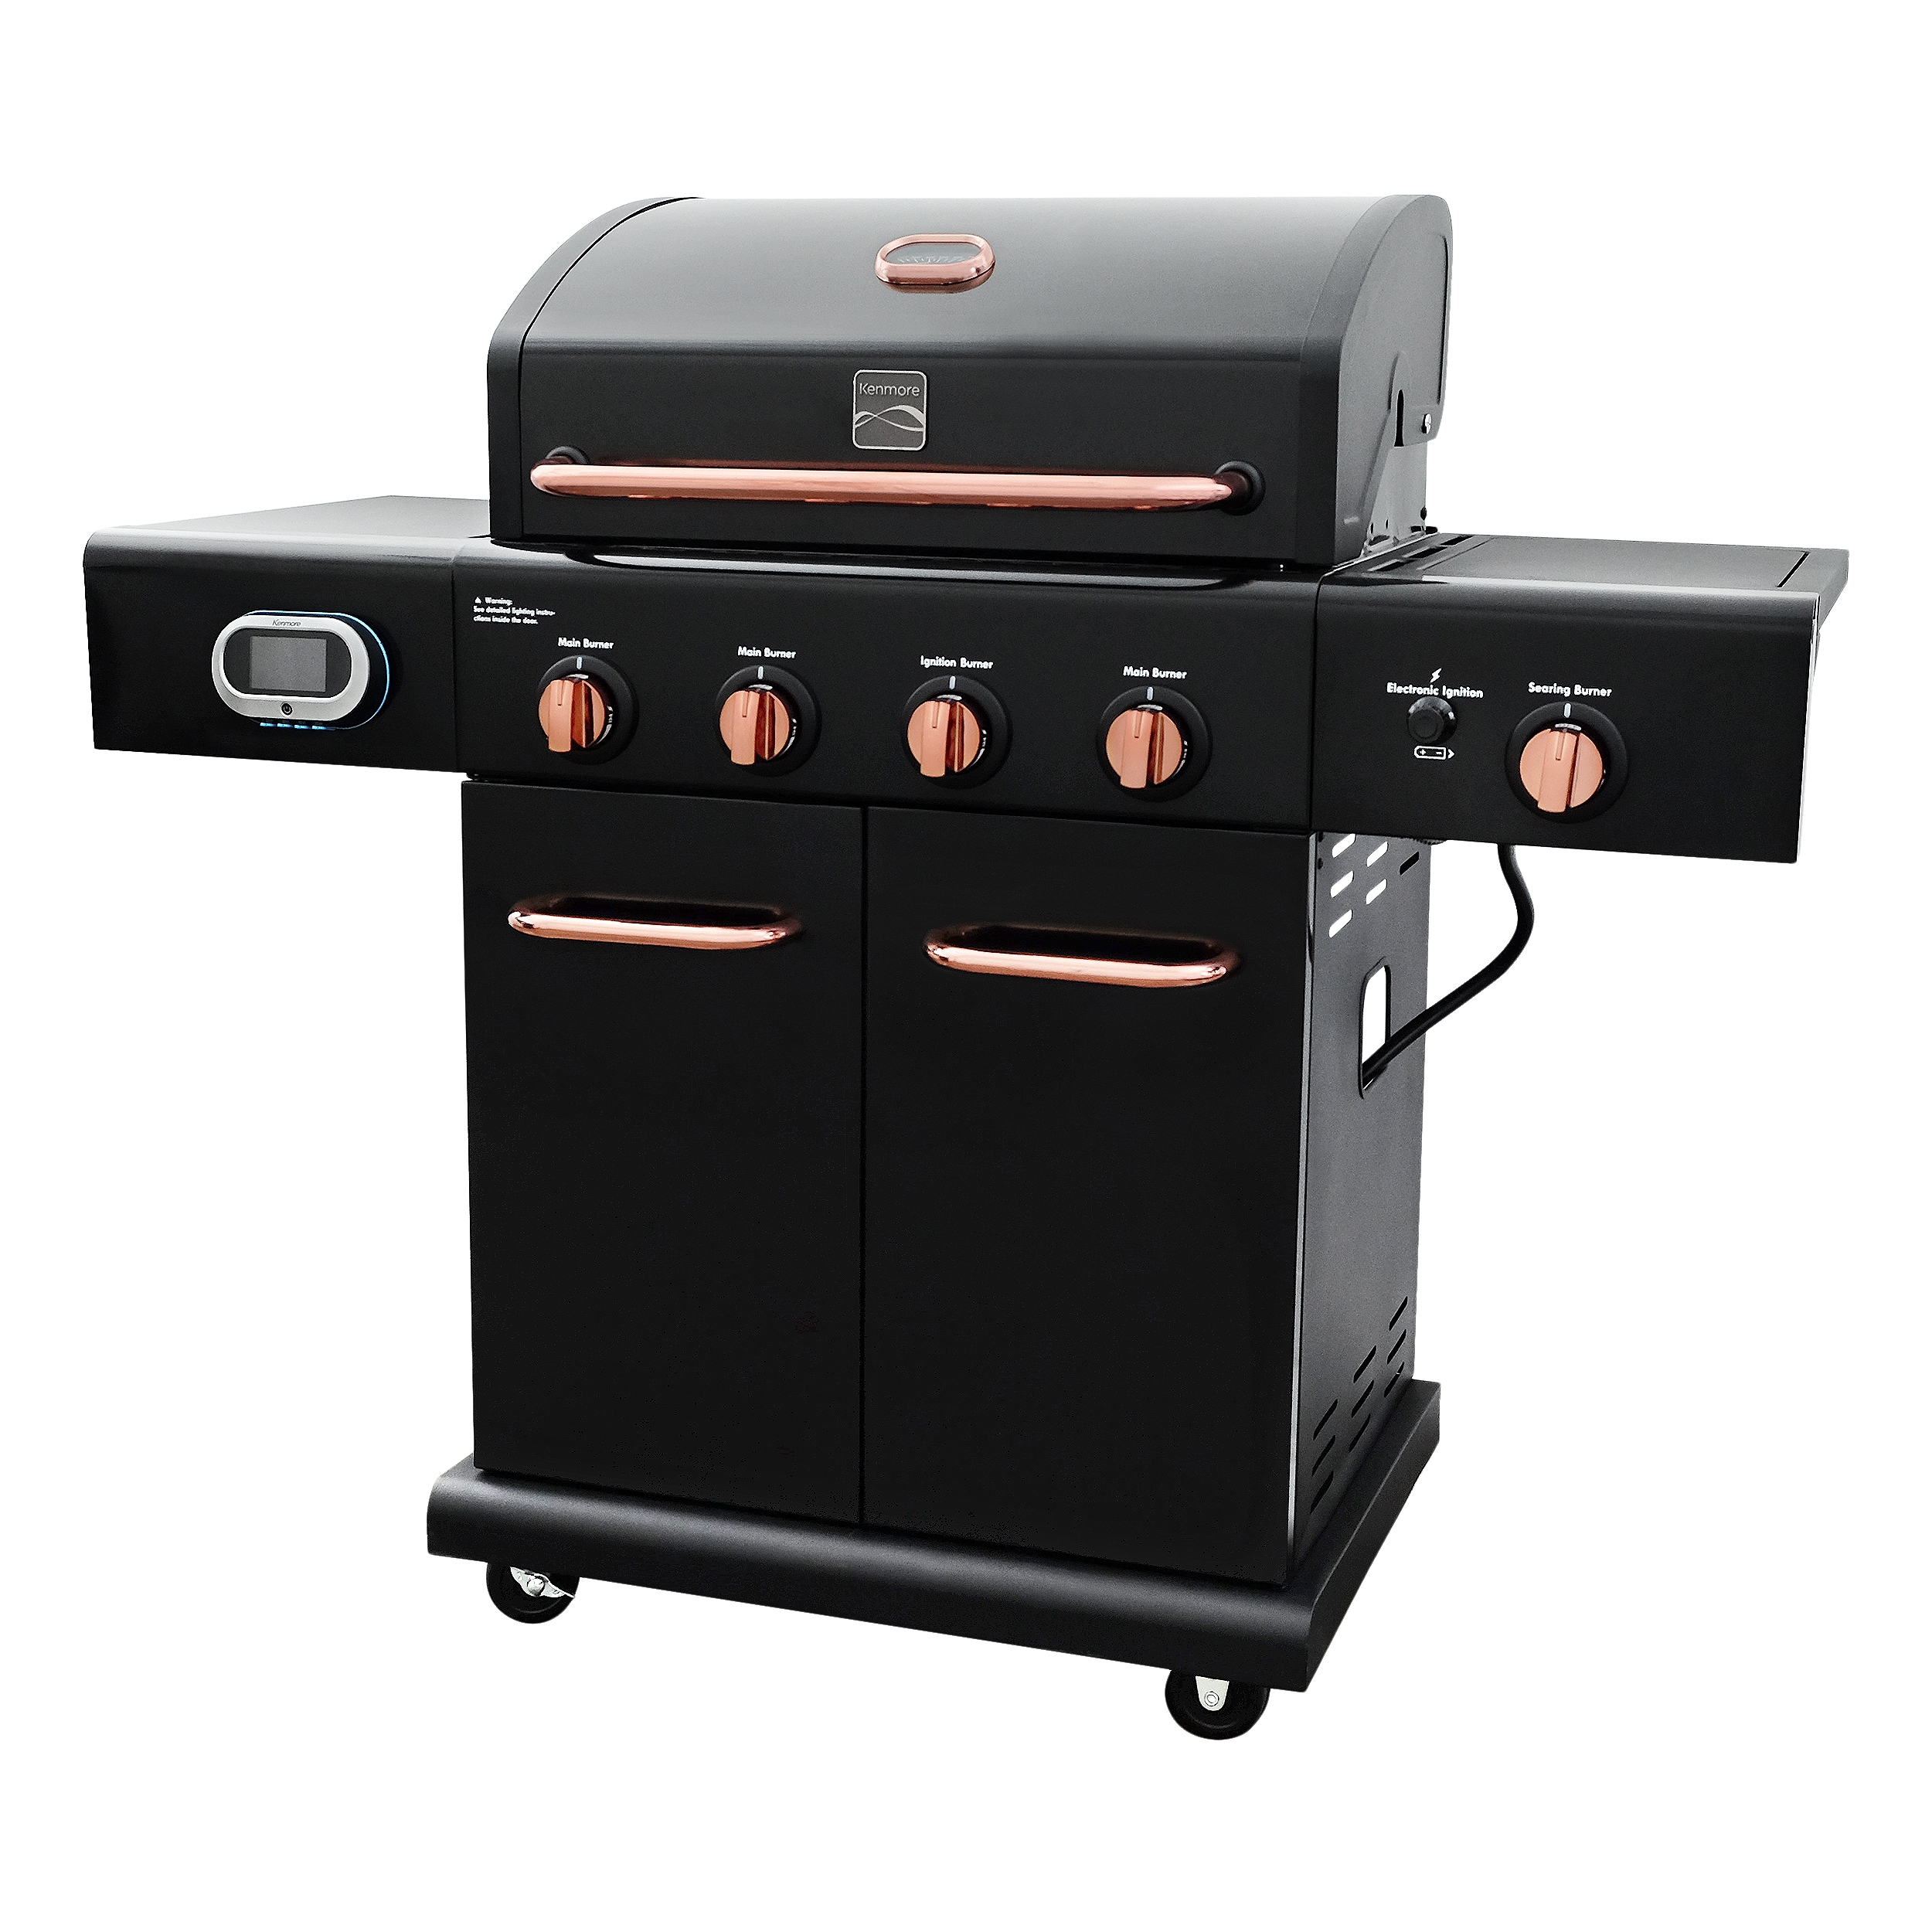 Member's Mark Pro Series 4 Burner Gas Grill - UNBOXING & ASSEMBLY